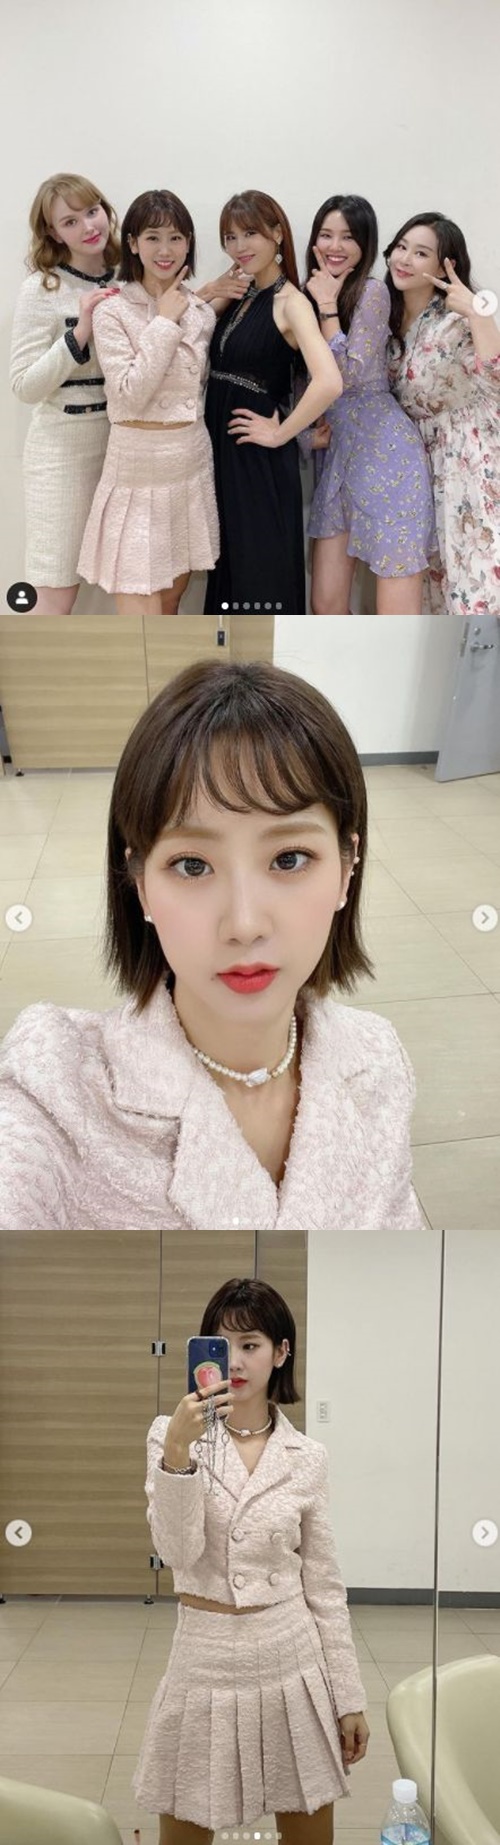 Miss Trot2 Kang Hye-yeon boasted a cute beauty.Kang Hye-yeon posted a picture and a photo on his instagram on the morning of the 17th, Talk show photo with Rainbow members.In the photo, Maria, Kim Yeonji, Hwang Woo-rim and Yun tae-hwa were together with him.The five people gave bright energy with a beautiful beauty and a cheerful atmosphere.In another photo, Kang Hye-yeon showed off her cute, cute beauty like a tree squirel.Meanwhile, Kang Hye-yeon failed to join TOP7 in eighth place in the TV Chosun entertainment program Mr. Trot2.